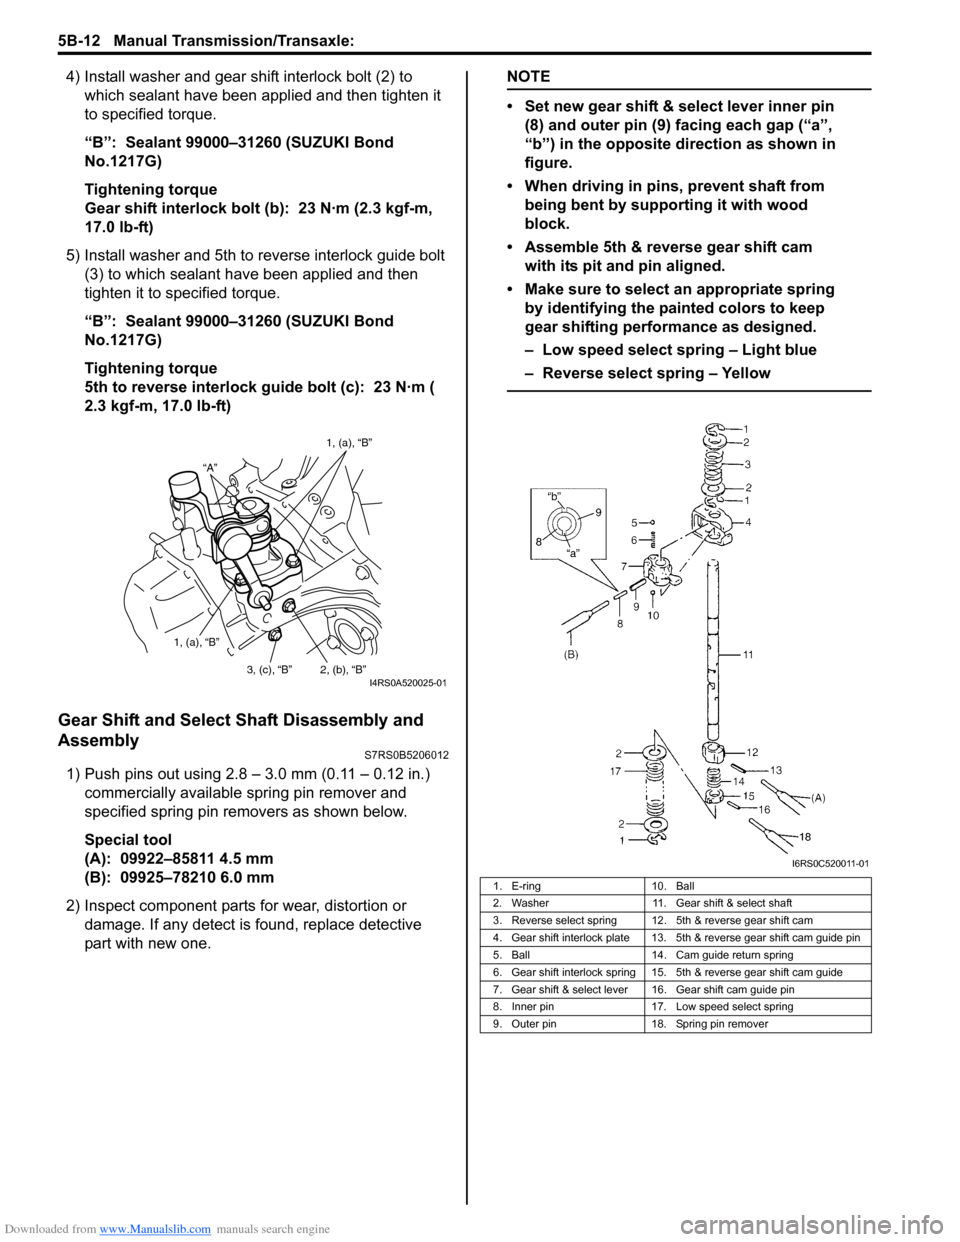 SUZUKI SWIFT 2008 2.G Service Workshop Manual Downloaded from www.Manualslib.com manuals search engine 5B-12 Manual Transmission/Transaxle: 
4) Install washer and gear shift interlock bolt (2) to which sealant have been app lied and then tighten 